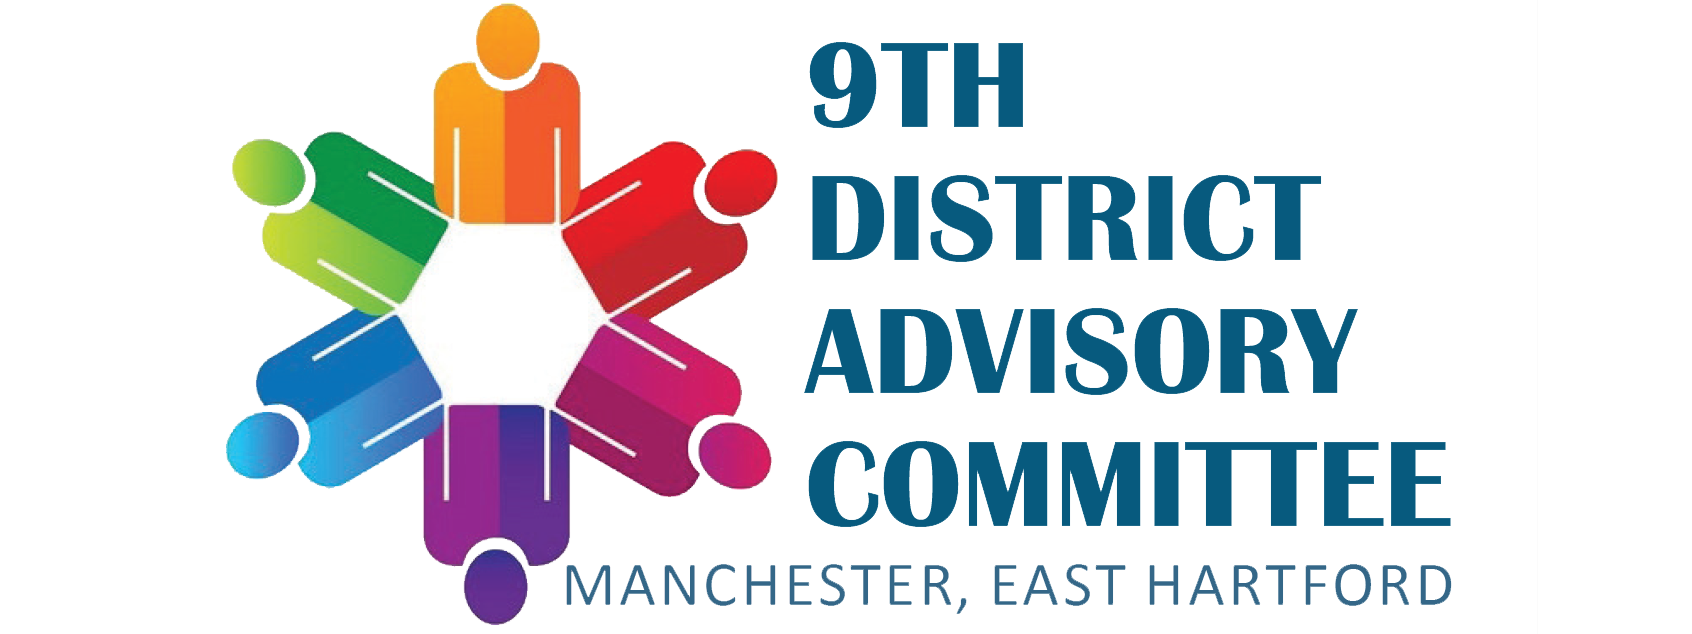 9th District Advisory Committee